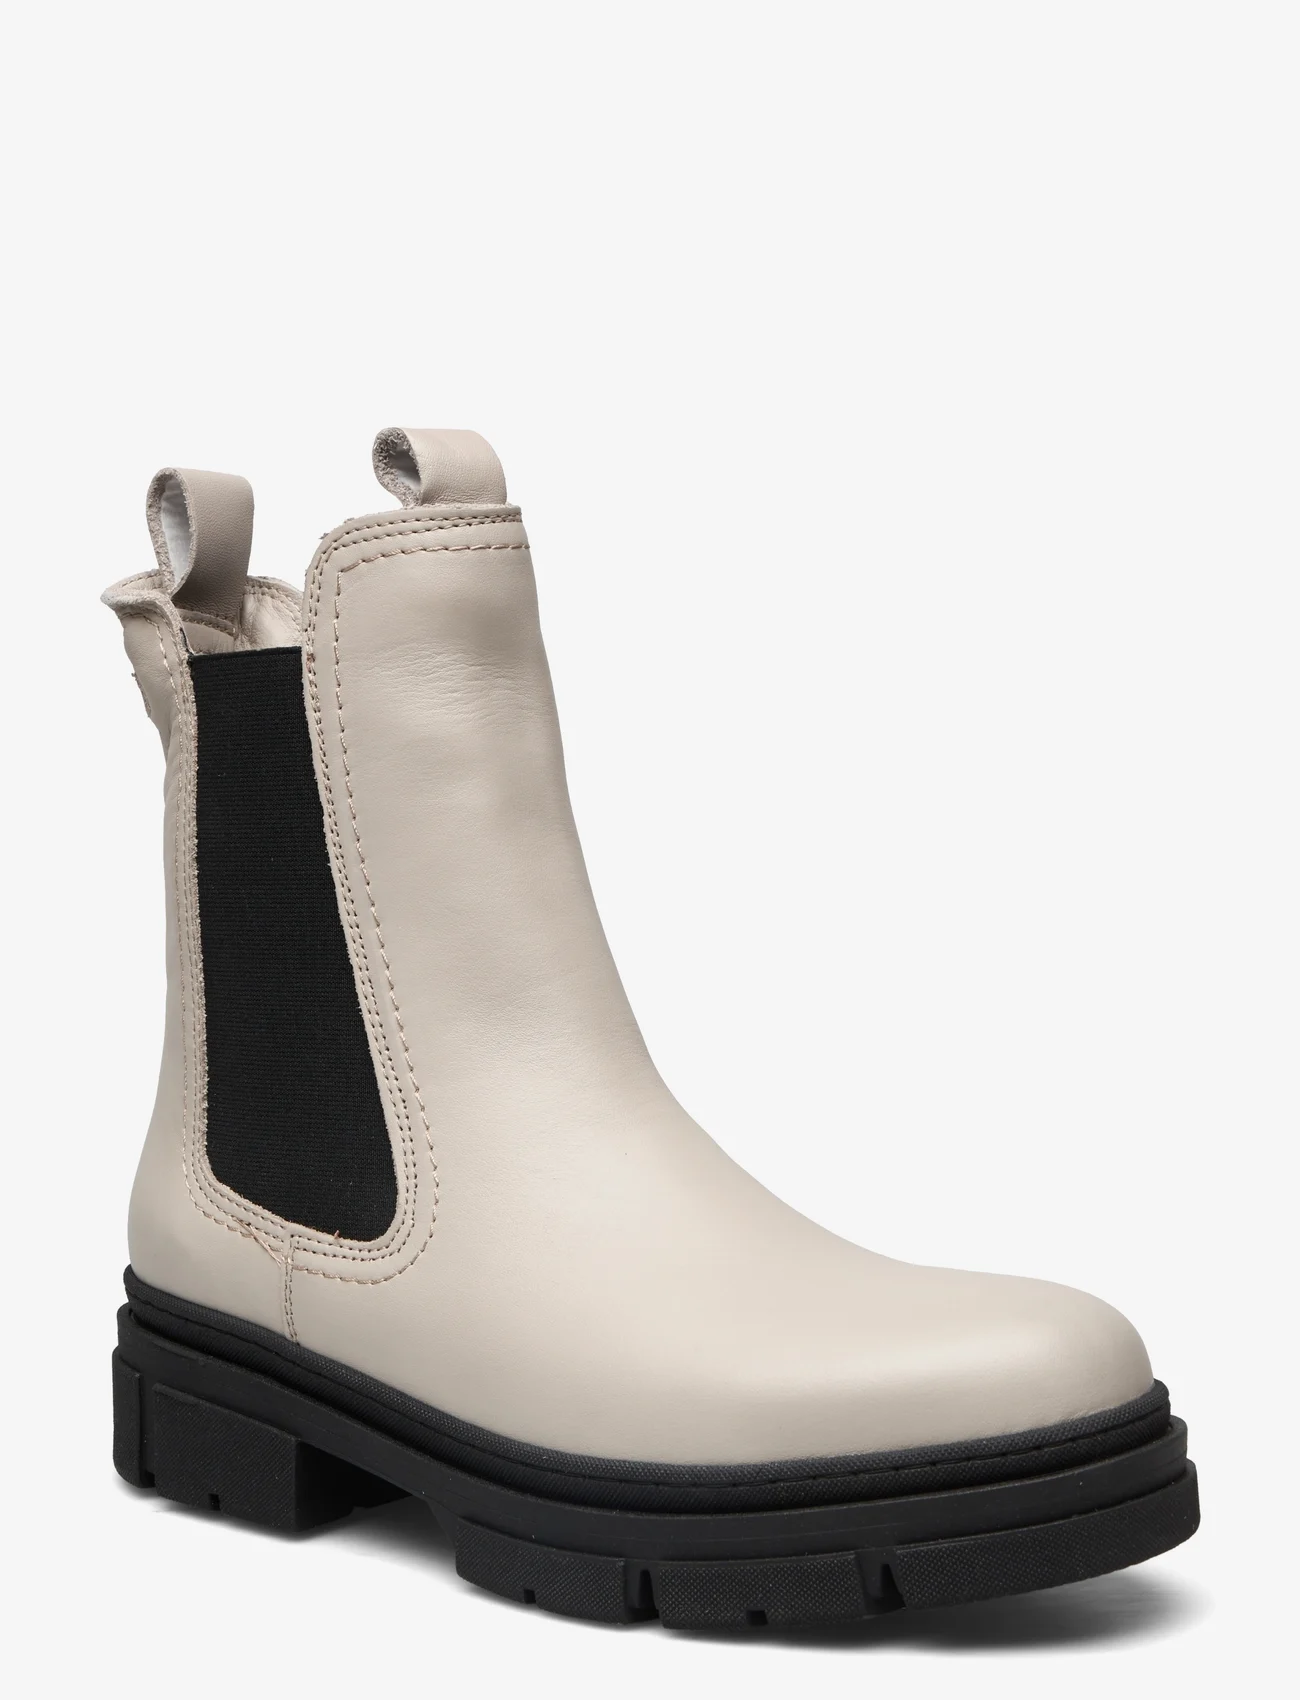 Tamaris - Women Boots - chelsea boots - grey leather - 0